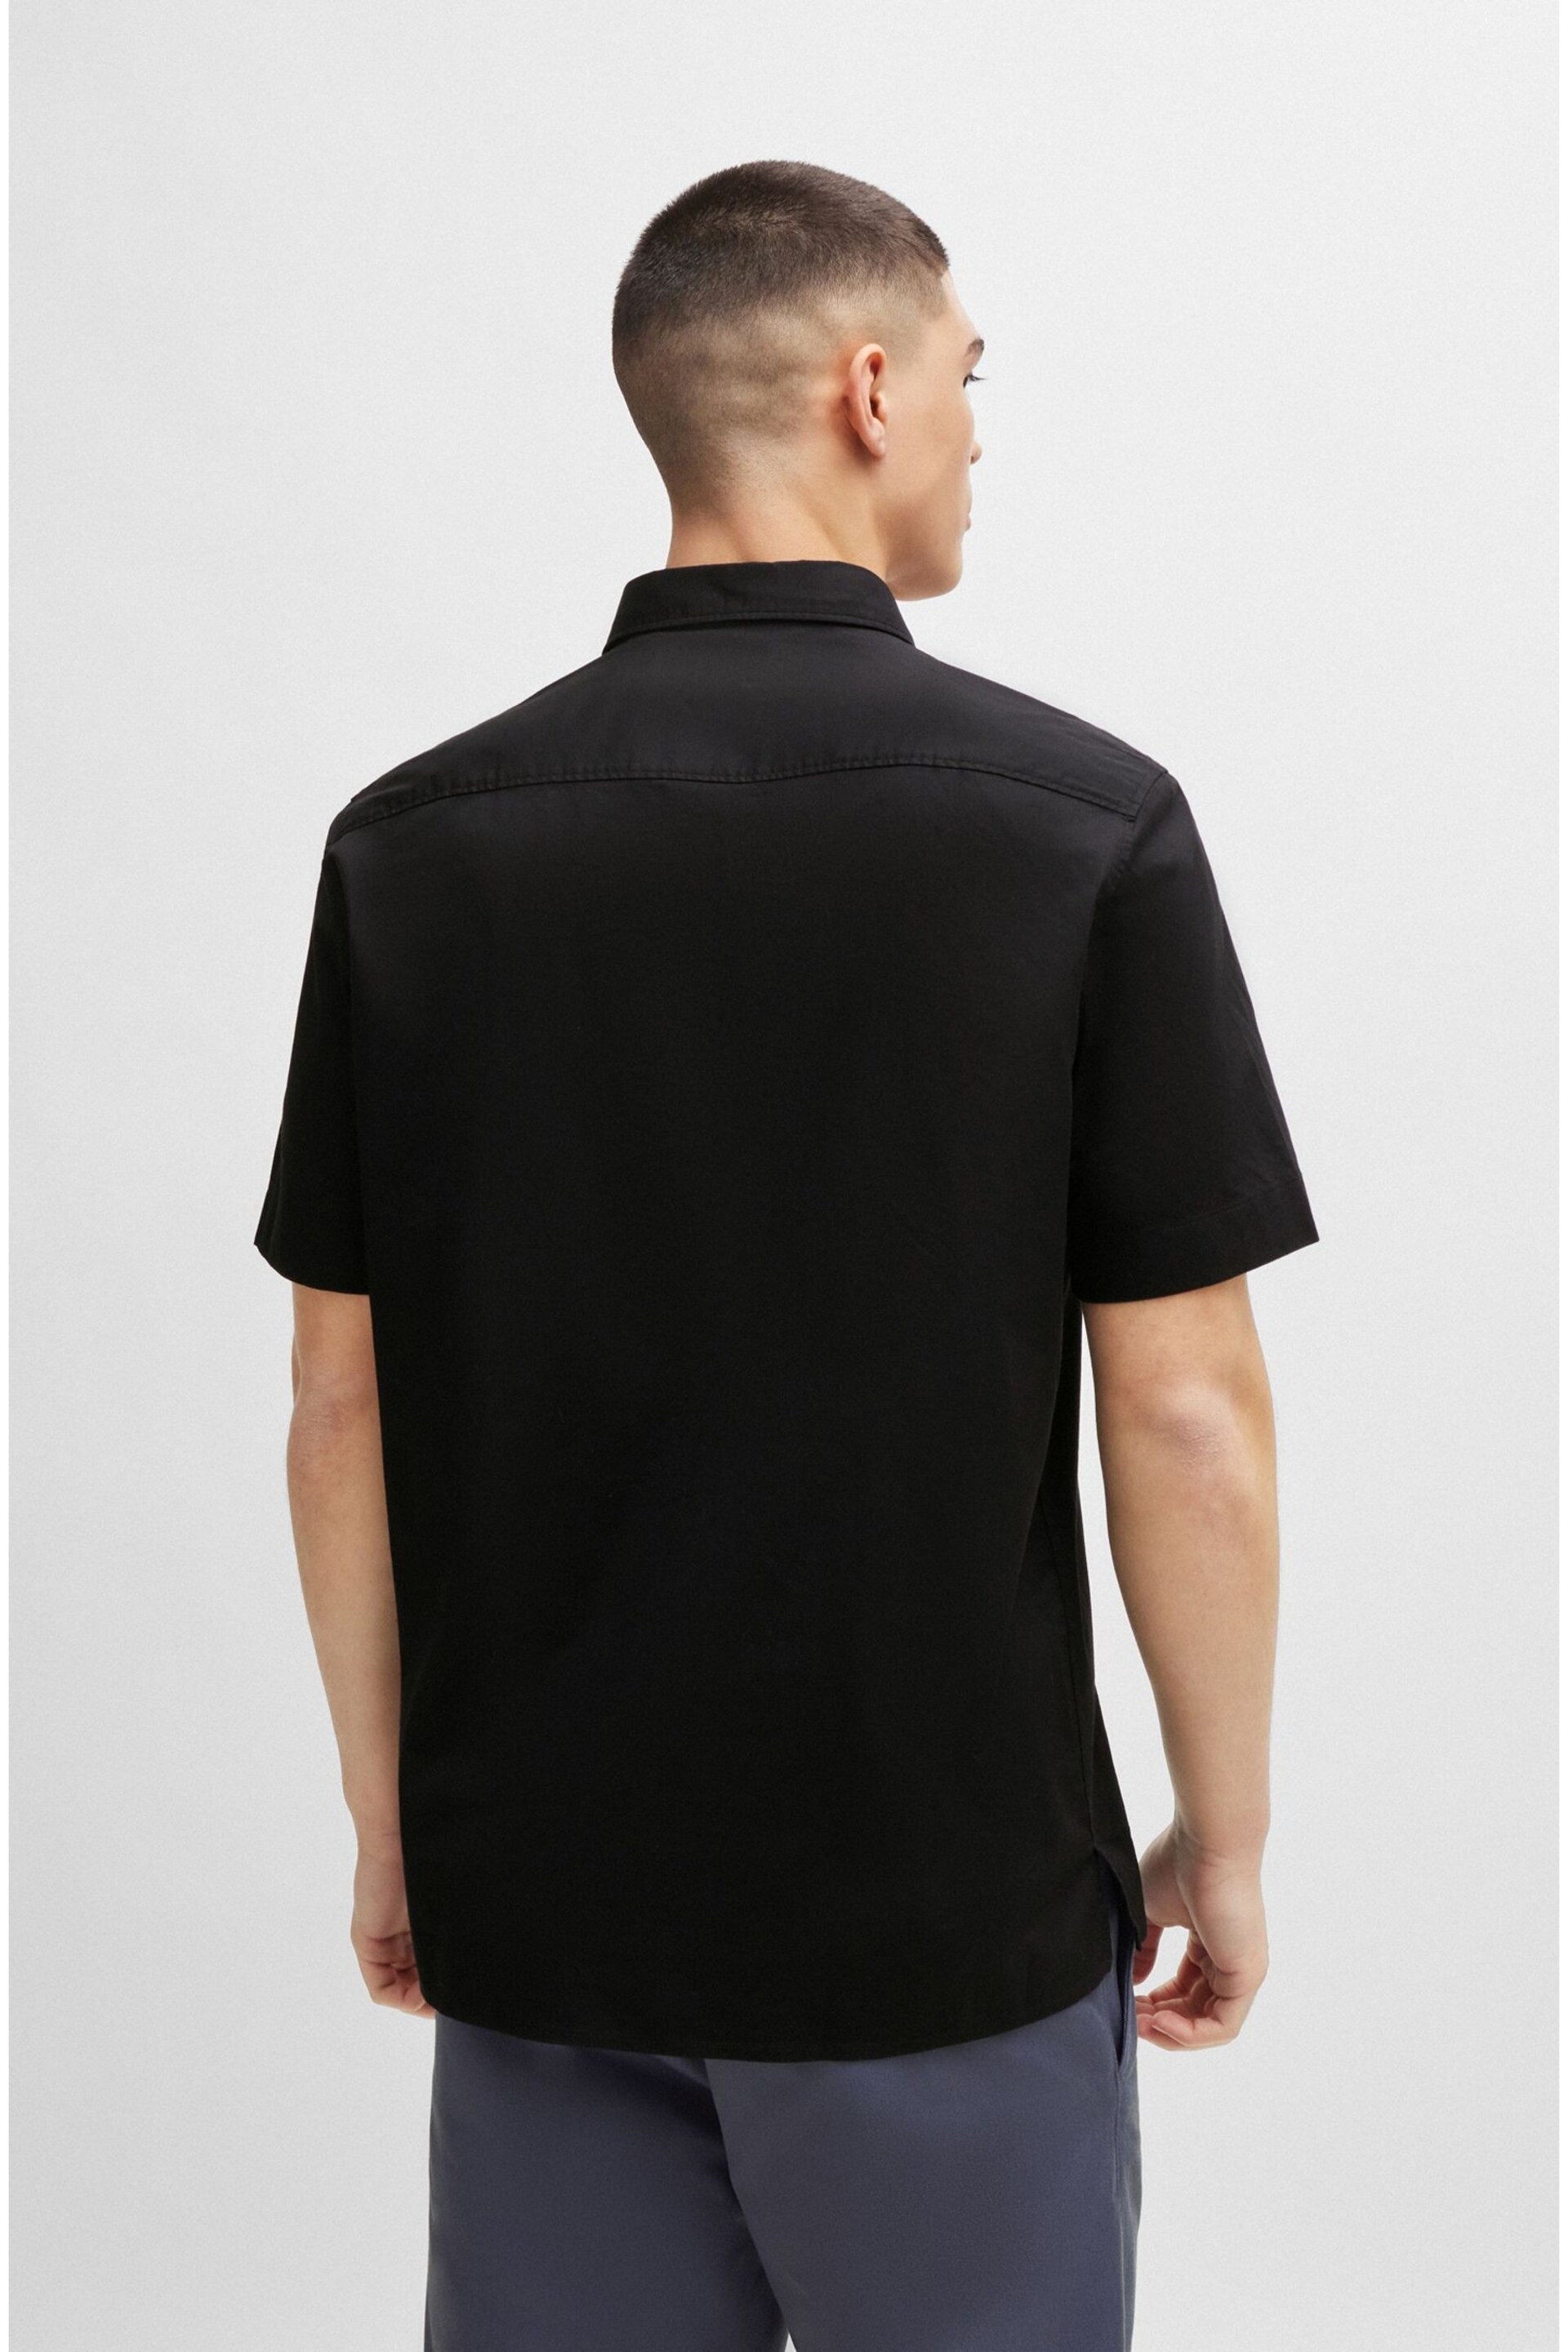 HUGO Relaxed Fit Black Shirt in Stretch Cotton Canvas - Image 2 of 6